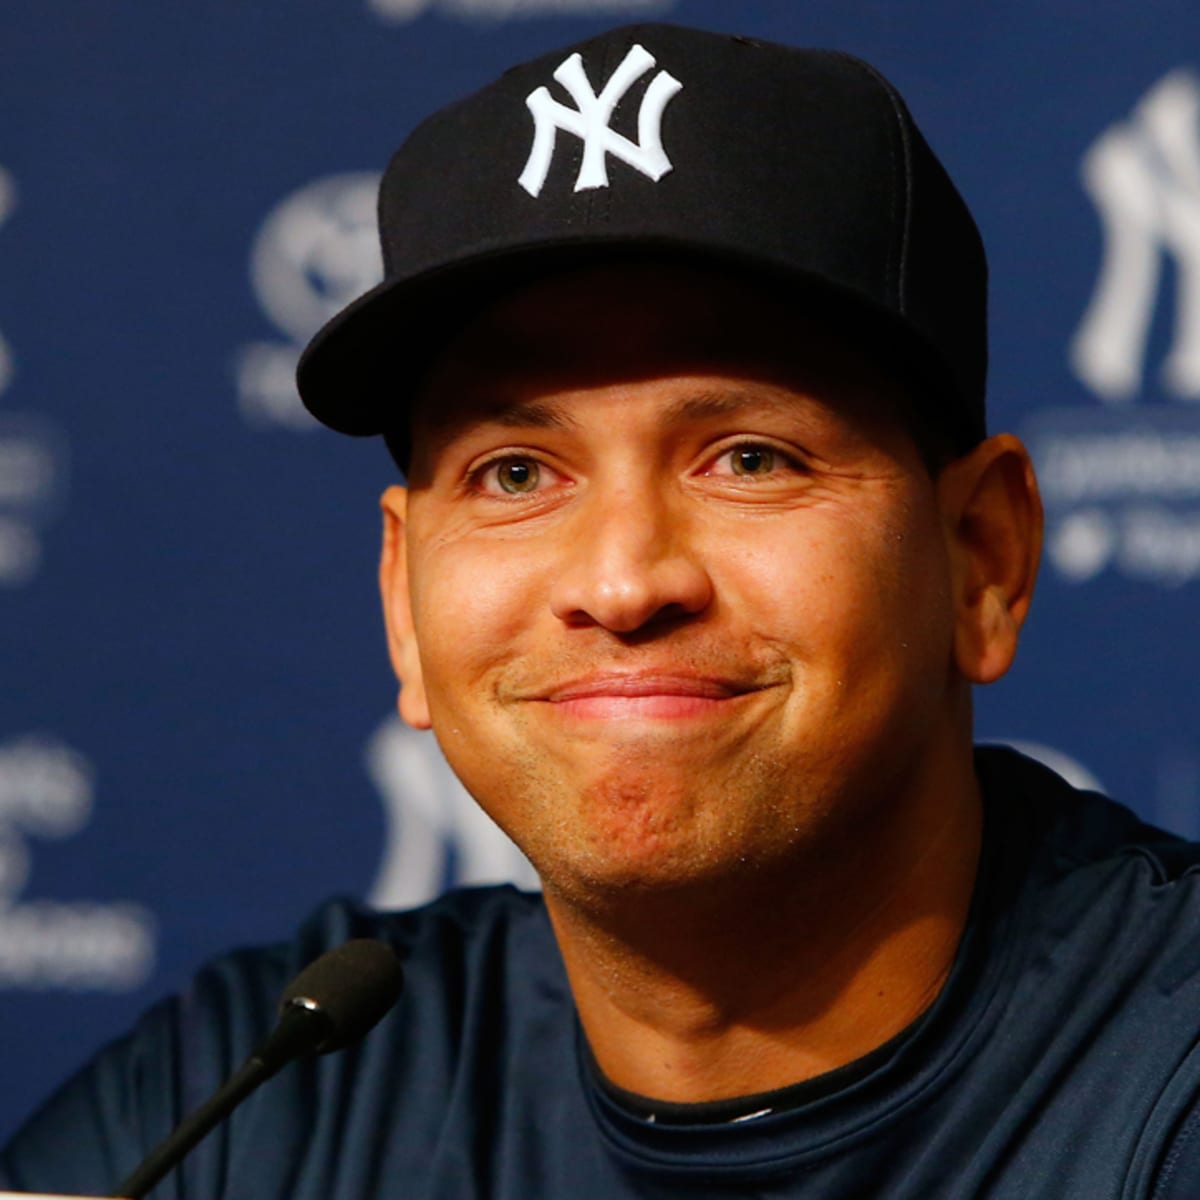 Alex Rodriguez Returns to MLB Roots Ahead of 'Field of Dreams' Game